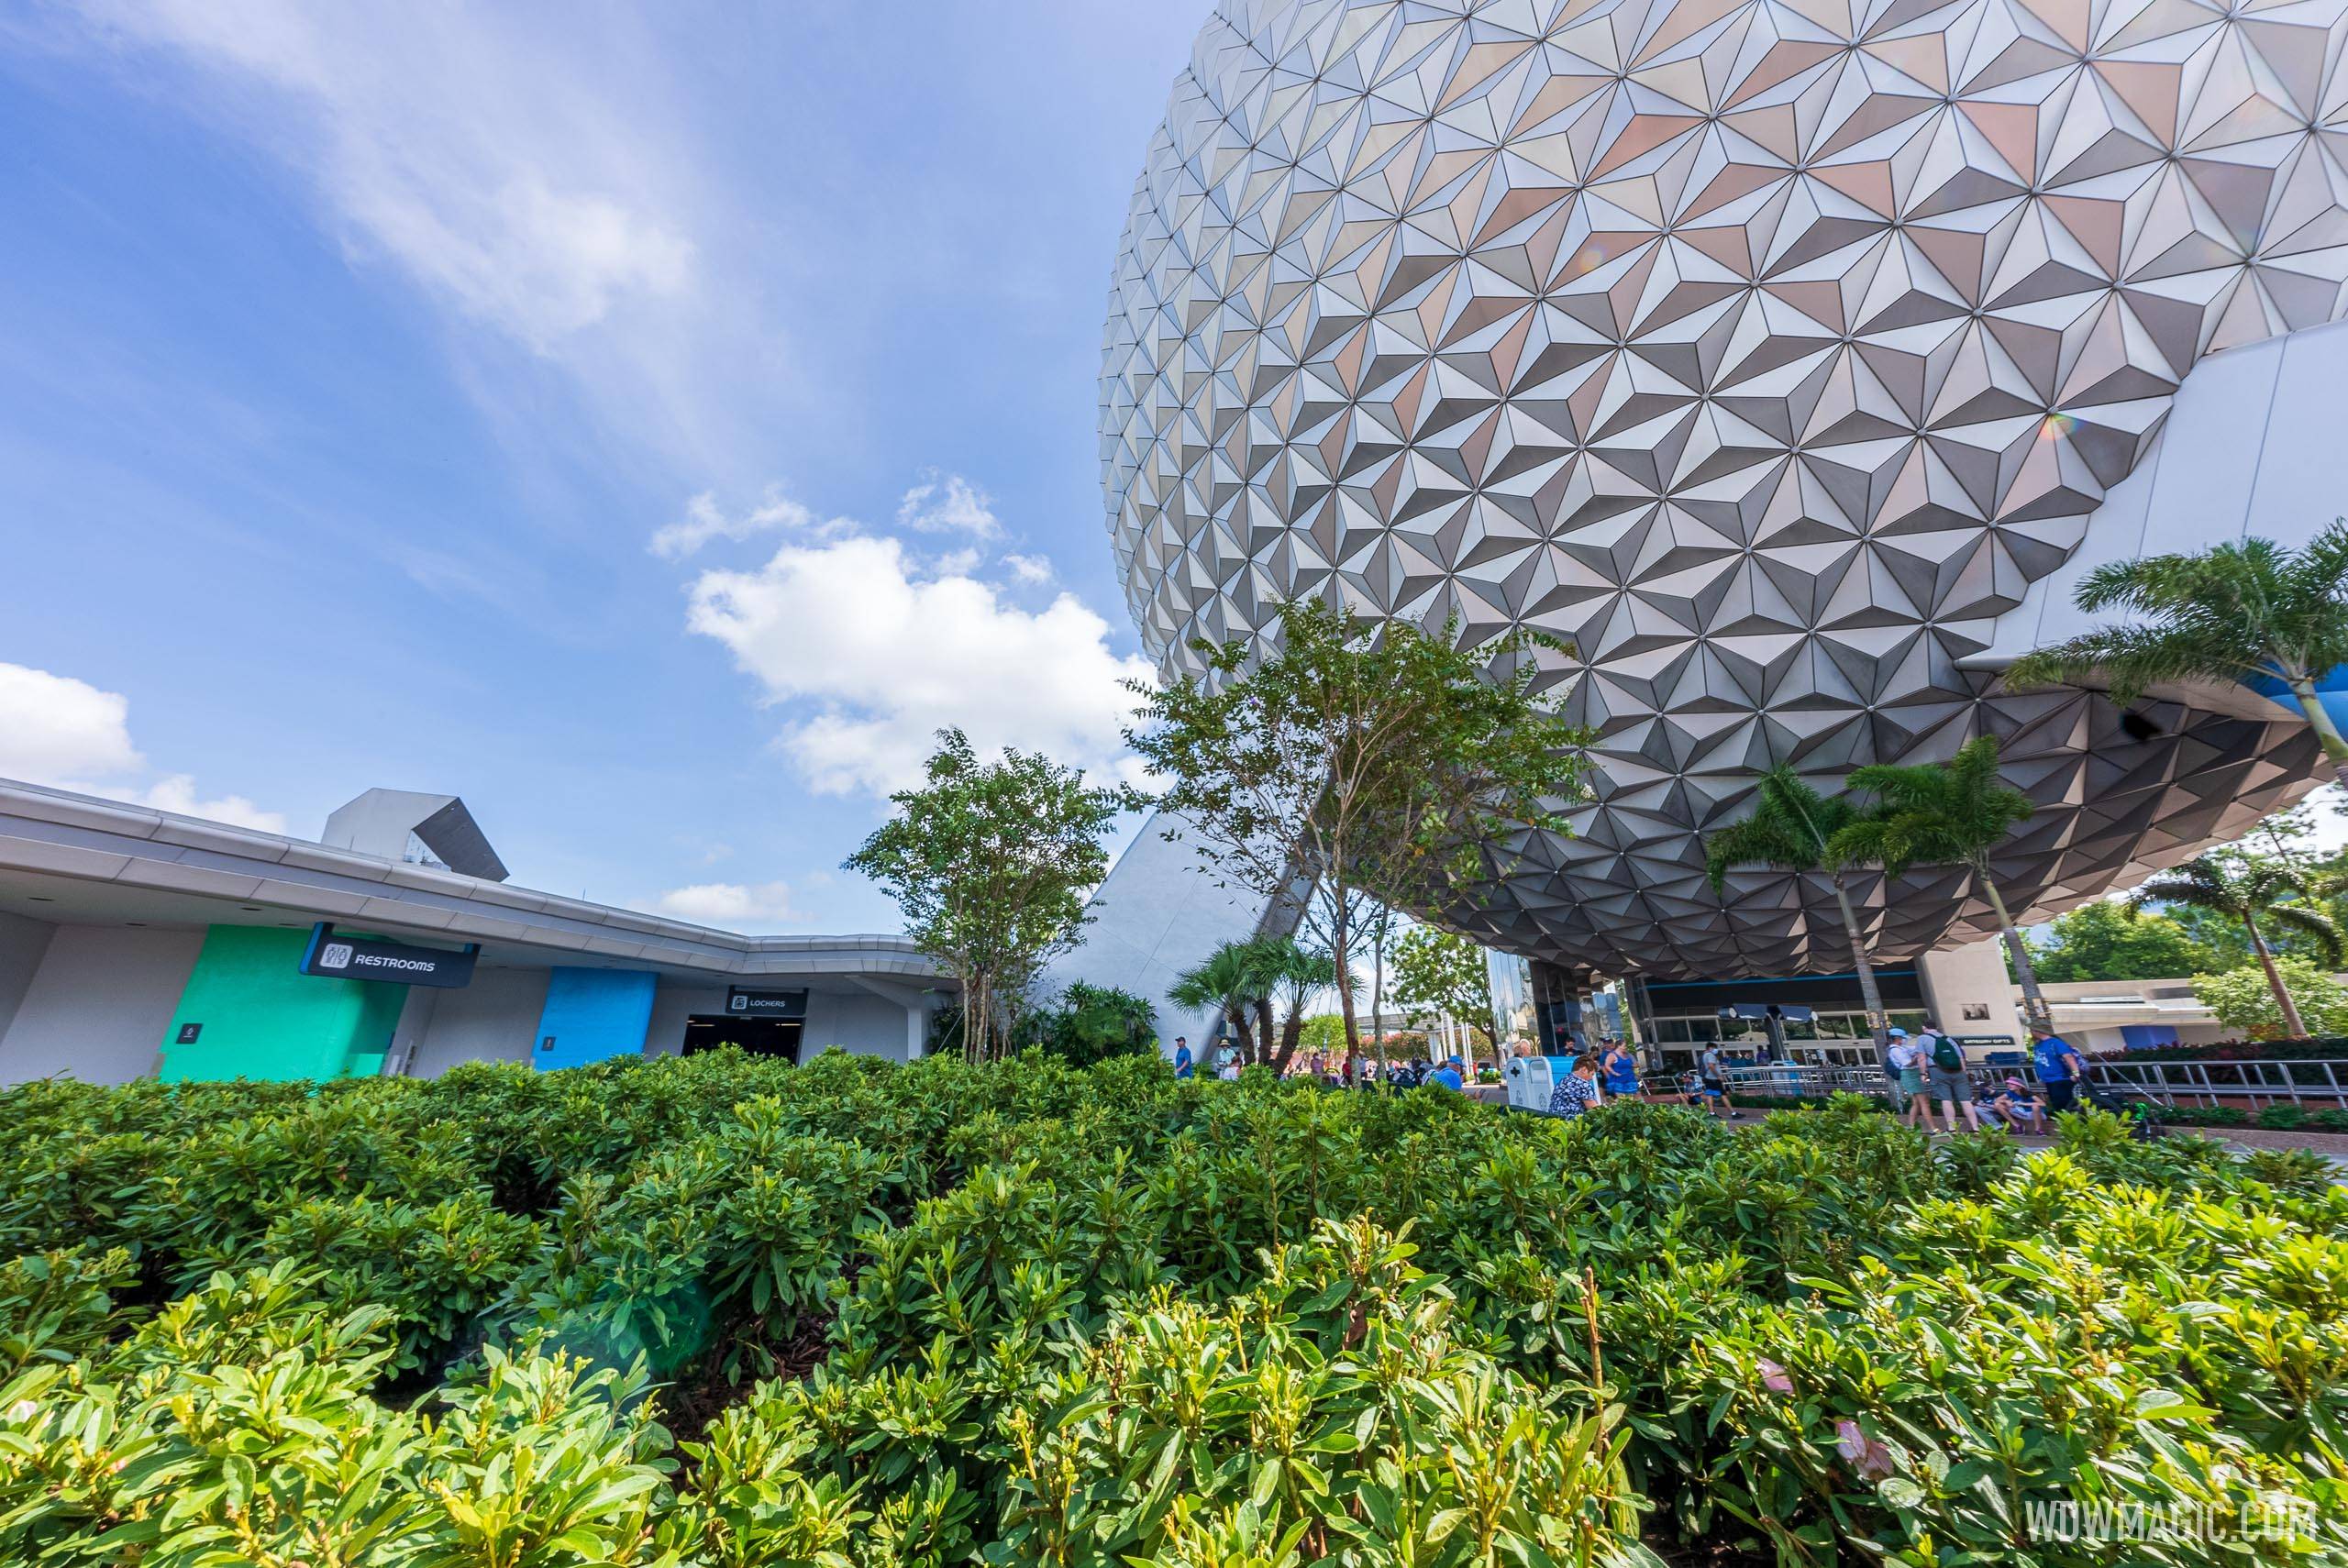 New landscaping around Spaceship Earth - August 2021